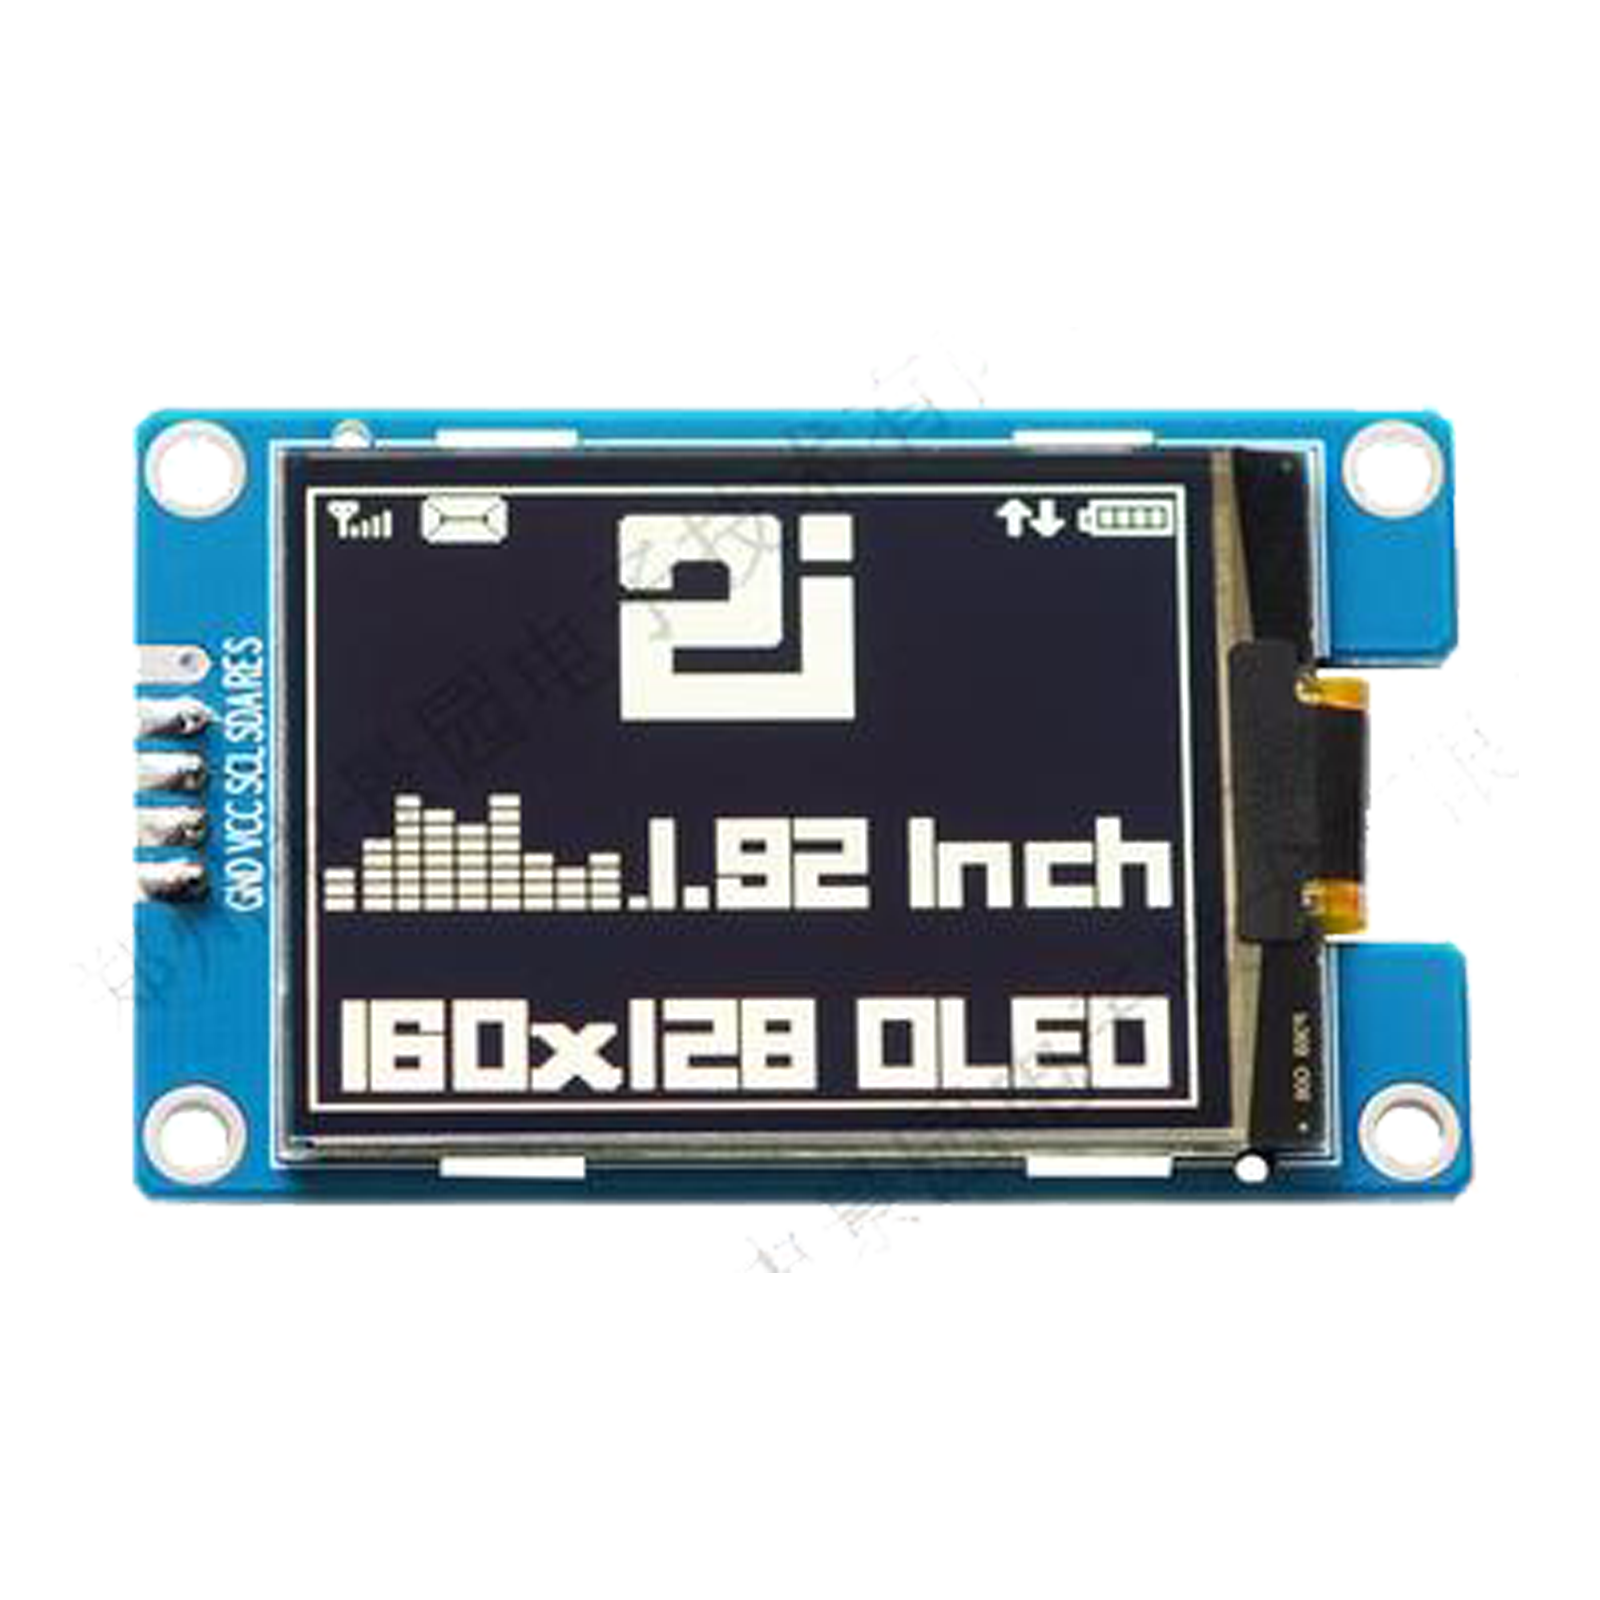 1.92-inch monochrome graphic OLED display module showing text